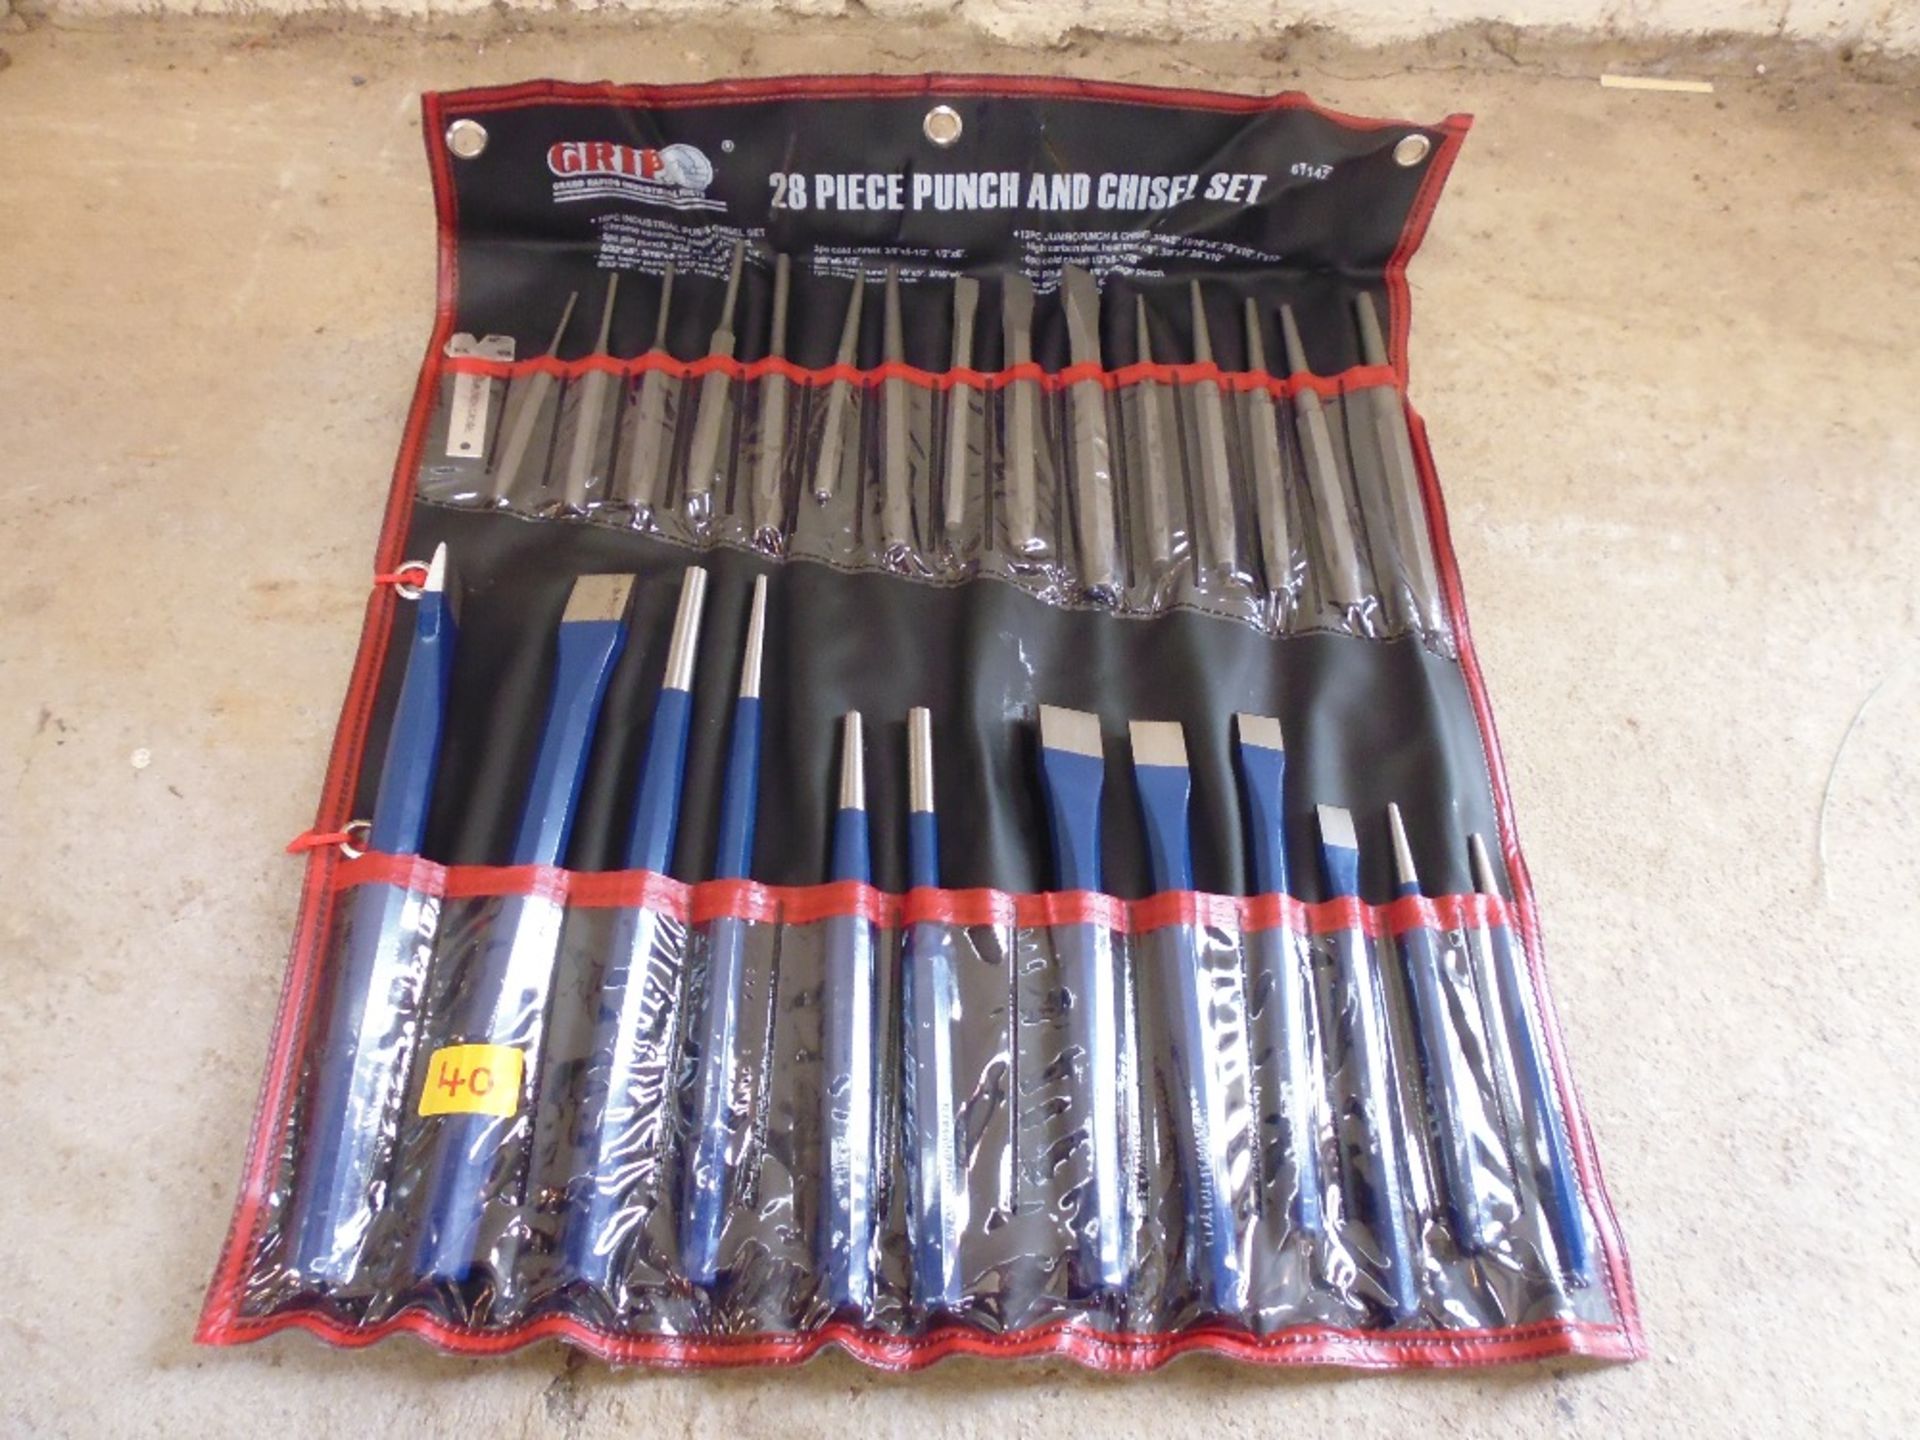 28 piece punch and chisel set.